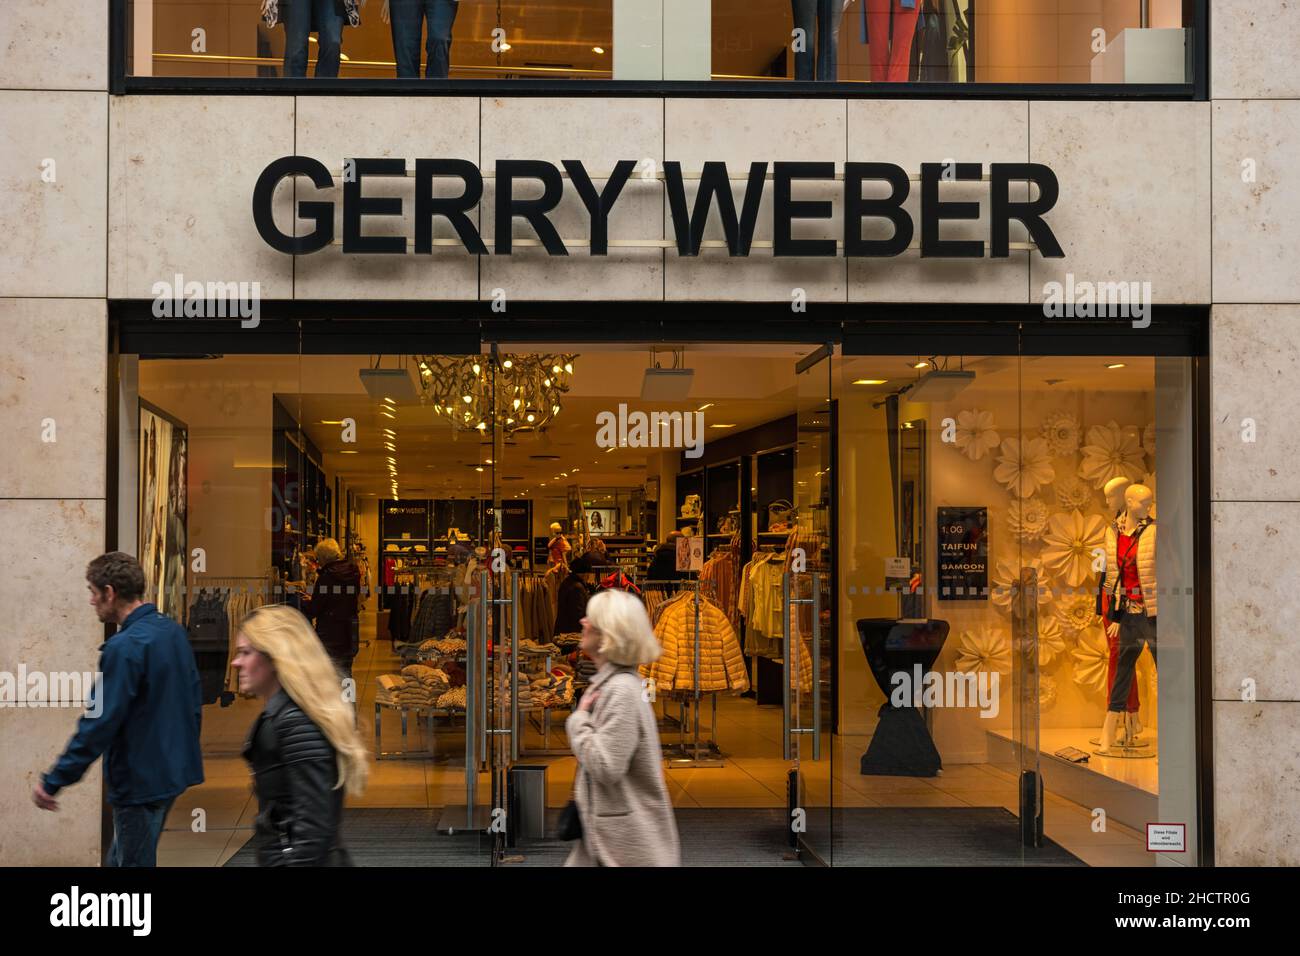 Store of the clothing company "Gerry Weber", Gerry Weber manages 1,000 own  stores with brands Taifun, Samoon and Hallhuber Stock Photo - Alamy